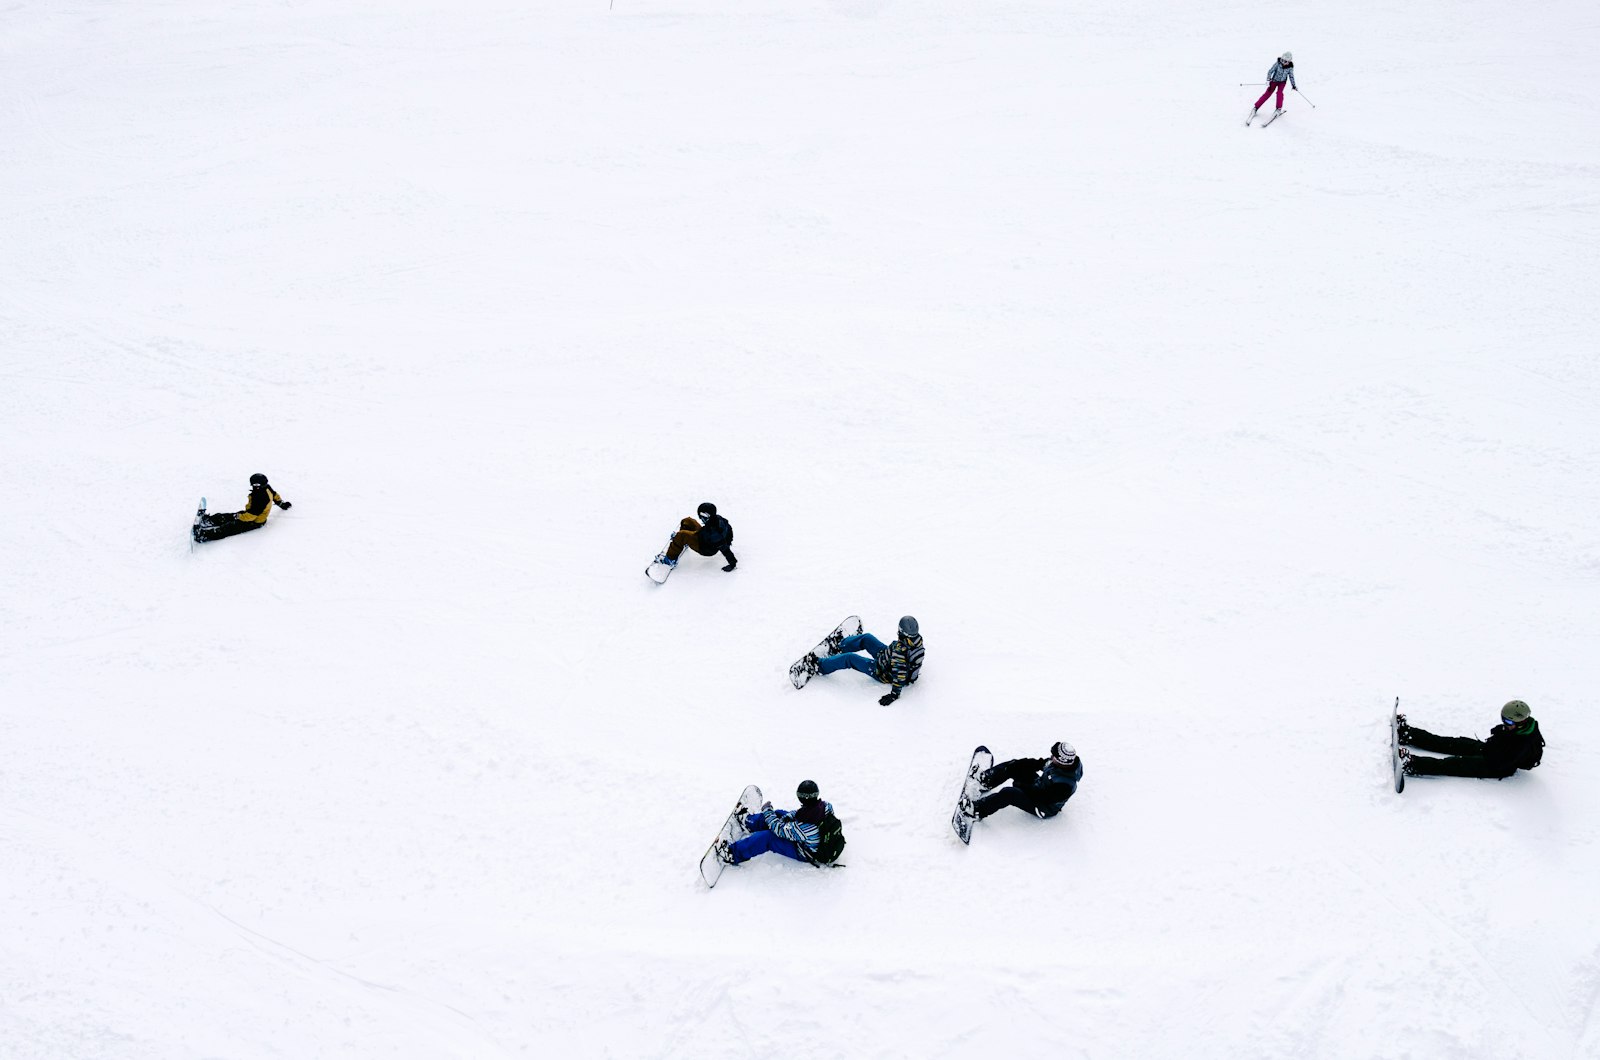 Leica T (Typ 701) + Summicron T 1:2 23 ASPH. sample photo. People playing snowboards photography